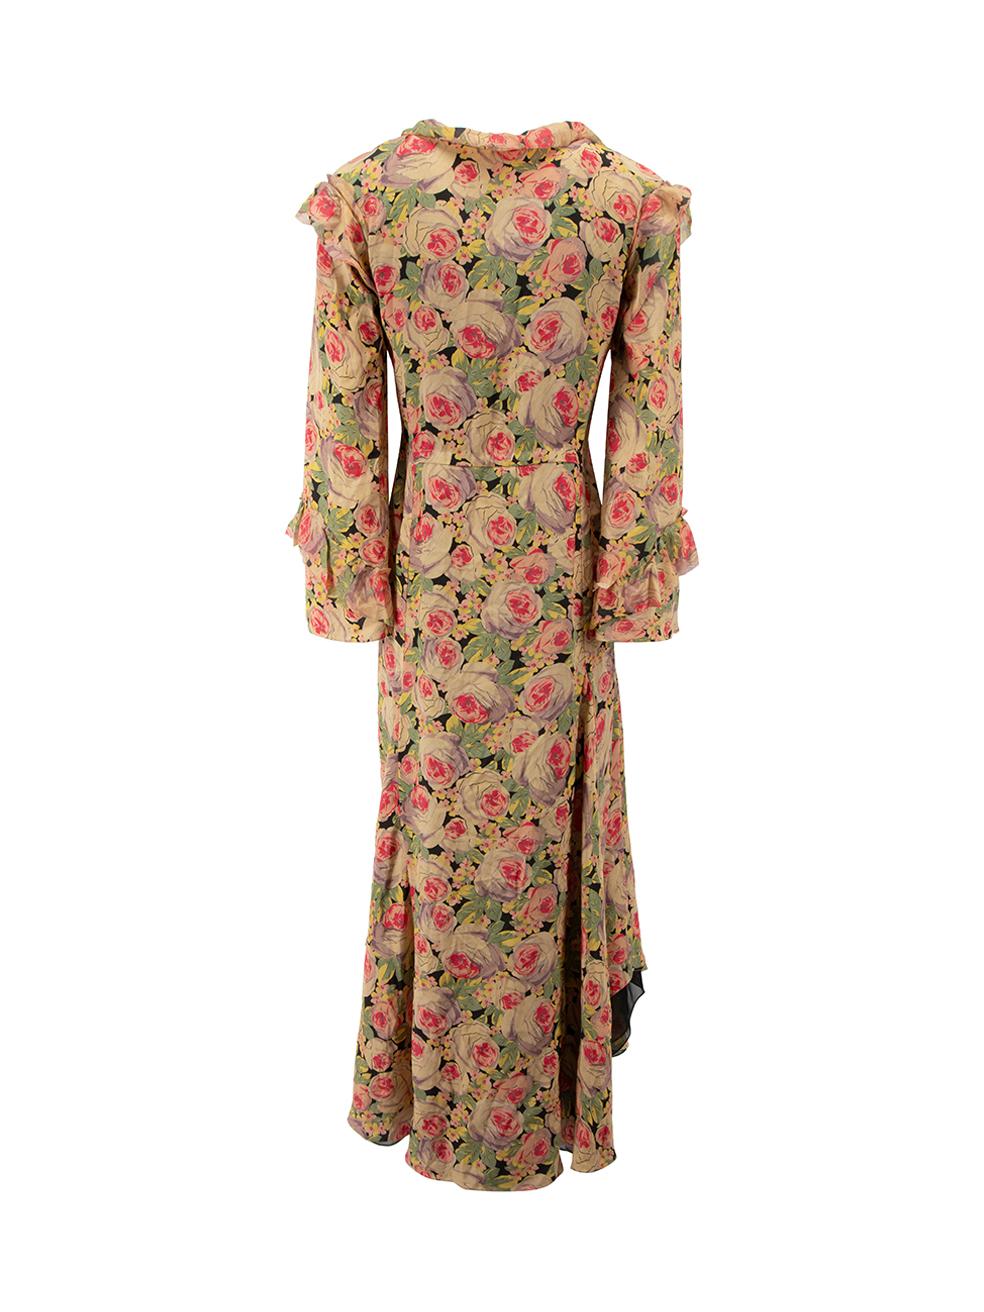 Vilshenko Floral Ruffle Detail Maxi Dress Size S In Good Condition For Sale In London, GB